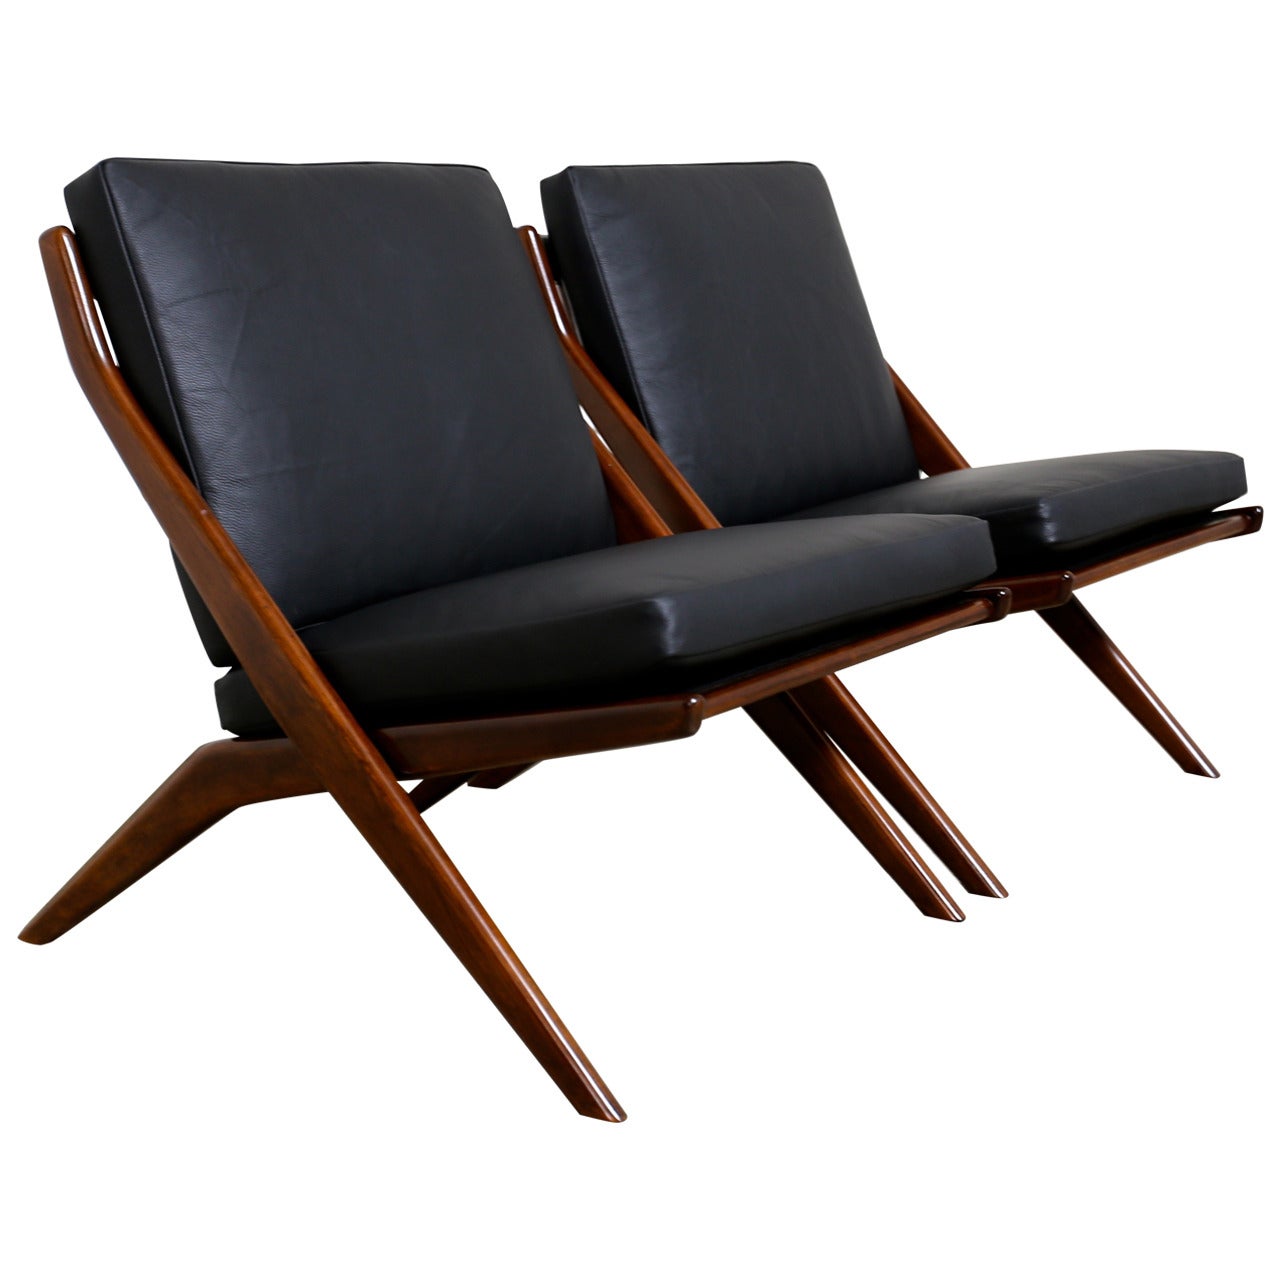 Pair of Leather Folke Ohlsson "Scissor" Chairs